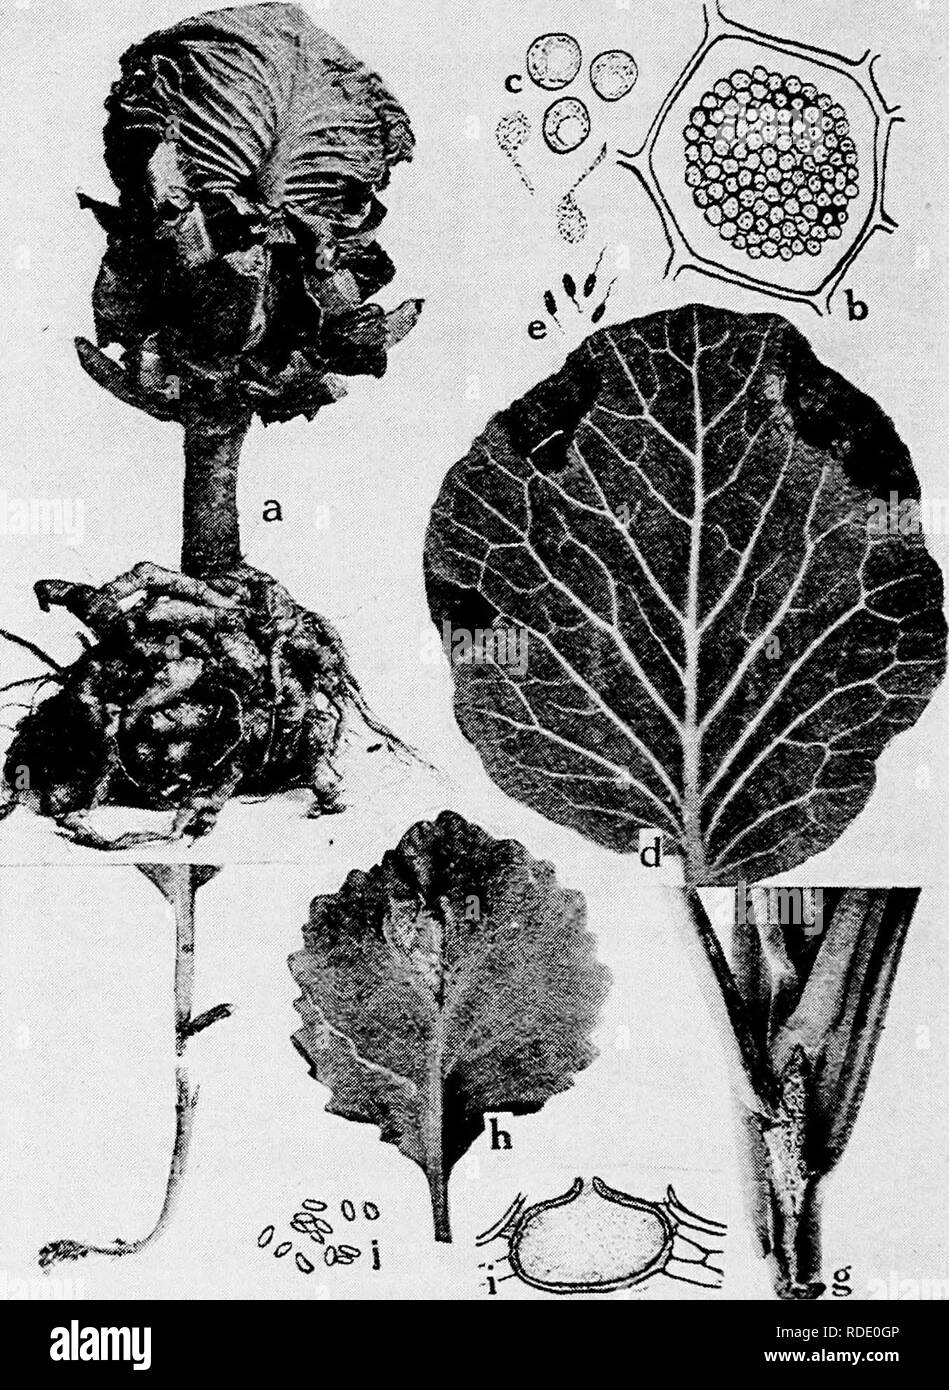 . Diseases of truck crops and their control . Vegetables. Fig. 30, Cabbage Diseases. a. Club root (after Cunningham), b. cell filled with spores of the club root or- ganism, c. spores and swarm spores of Plasmodiophora brassica {b. and c. after Chuff), d. black rot of cabbage (after F. C. Stewart), e. individual black rot germs of Pseuaomonas campestris, f. black-leg on young cabbasre seedling, g. black-leg lesion on foot of older cabbage plant, A. black-leg lesior â - Phoma olerace&lt;E,j. pycnospores of P. olexacecs {i. aiLc/;. riir.^r v.ivi=.v -..-. Please note that these images are extract Stock Photo